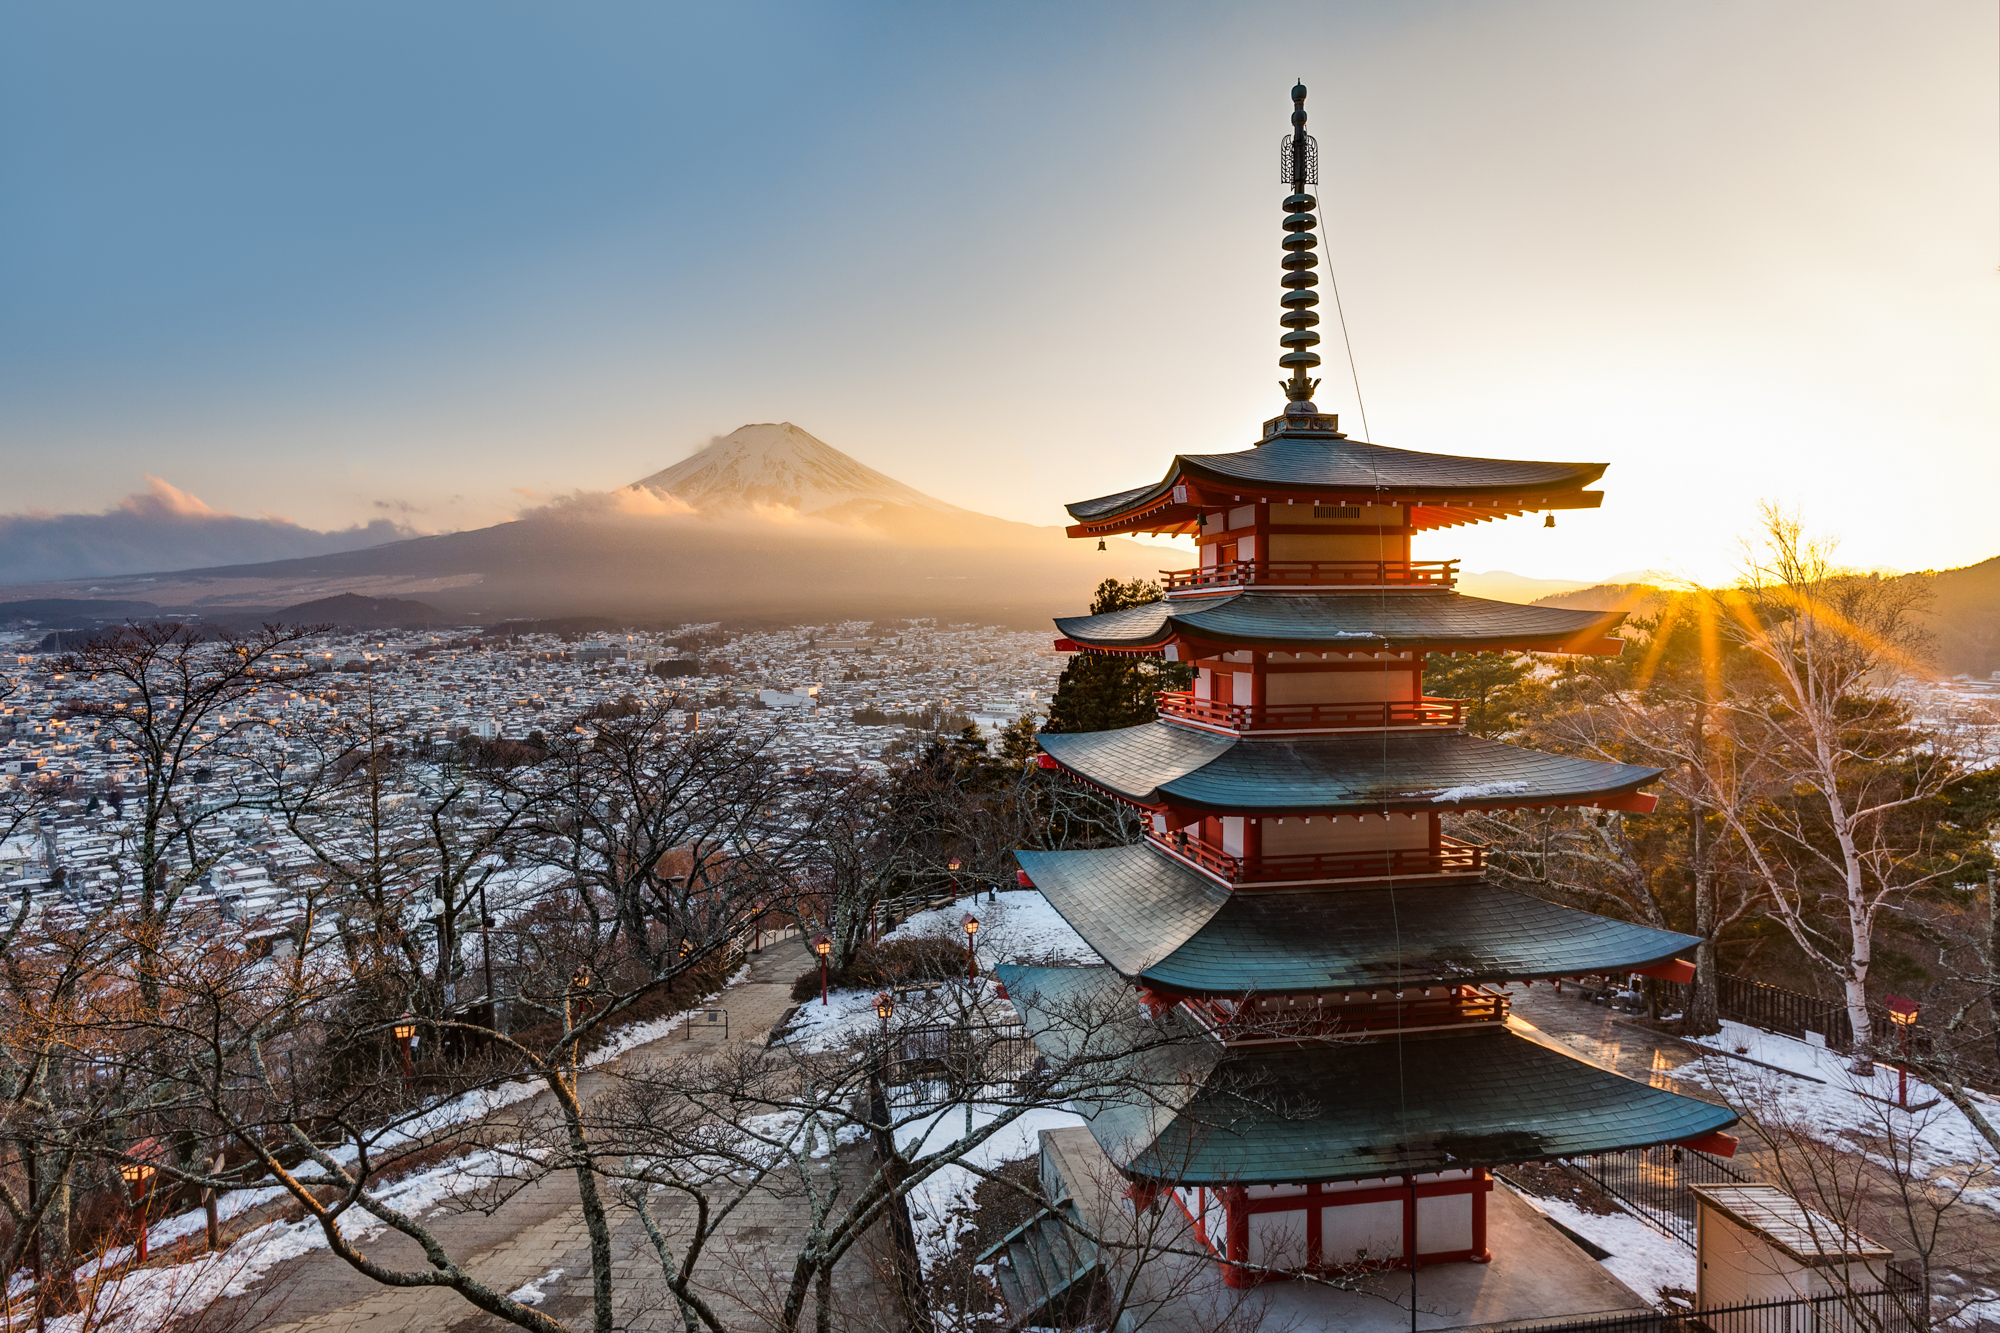 Japan in Winter: Chureito Pagoda and Mt Fuji in the background